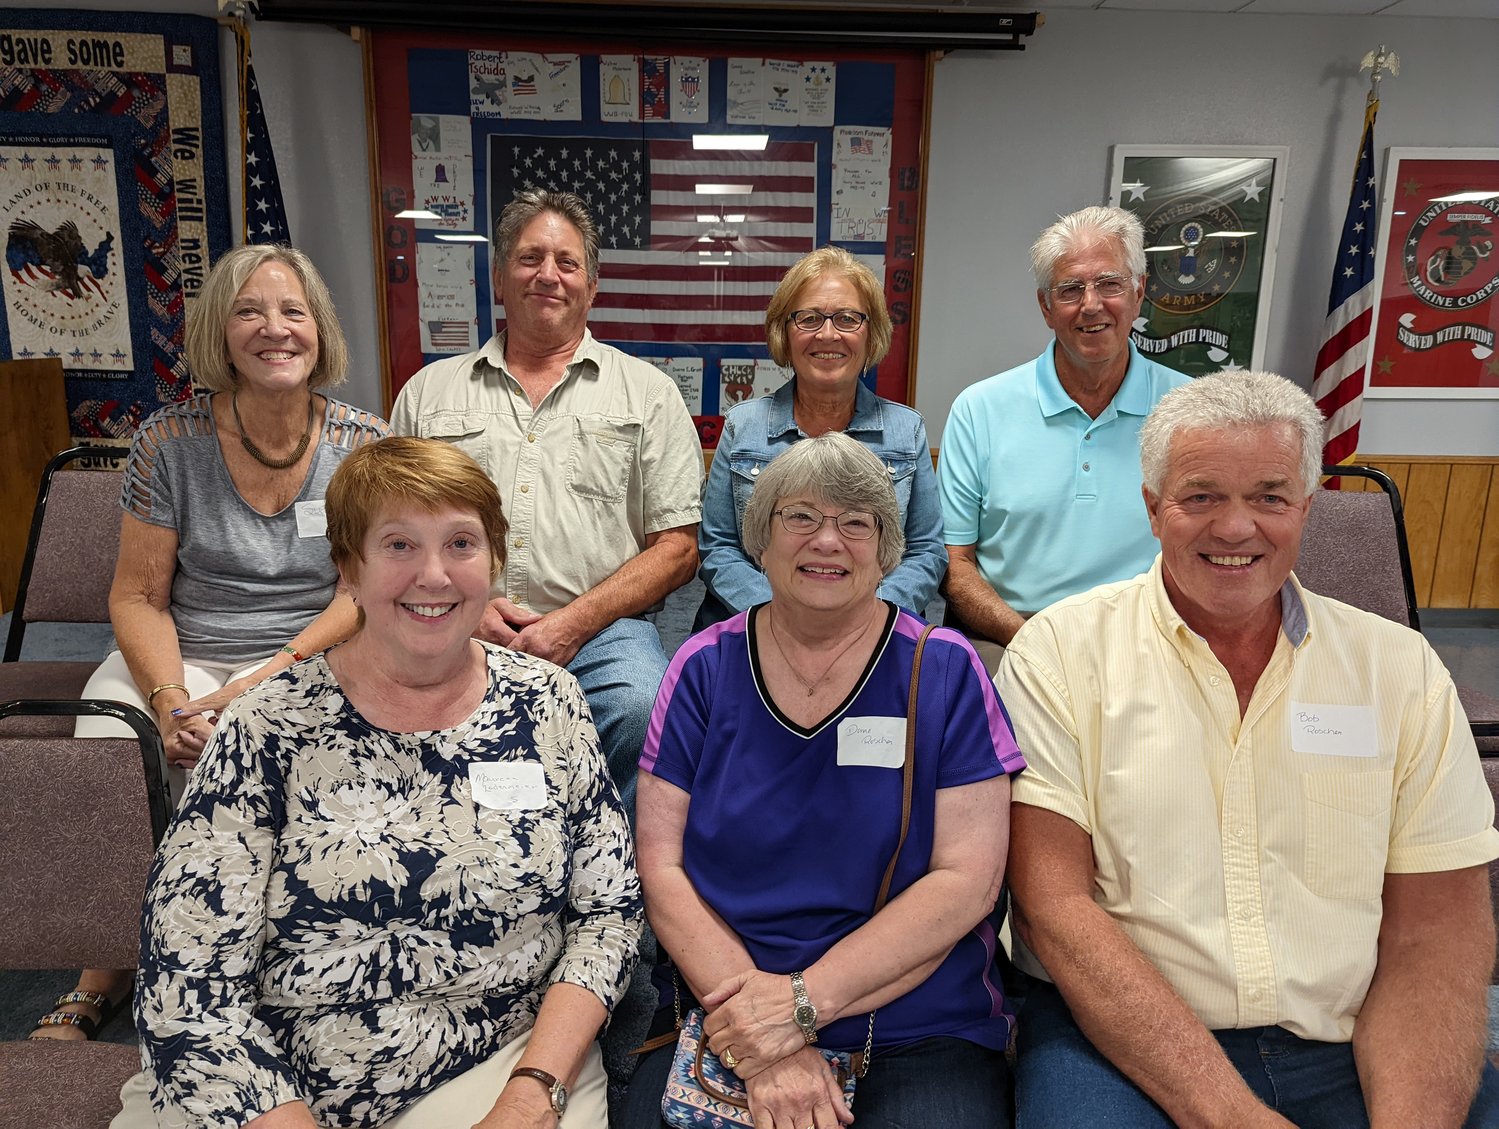 12  Members of the Goodhue class of 1972 married each other.  Those present at their 50th reunion were: Front row, Maureen (O'Connor) Lodermeier, Donna (Deden) and Bob Roschen

Back row Sue (Bremer)  and Rich Majerus, Rox (Dahling) and Dick Lodermeier.  Not present were Al Lodermeier, Neil and Corrine (Majerus) Stehr, Todd (deceased) and Joann (Quade) Schulz.